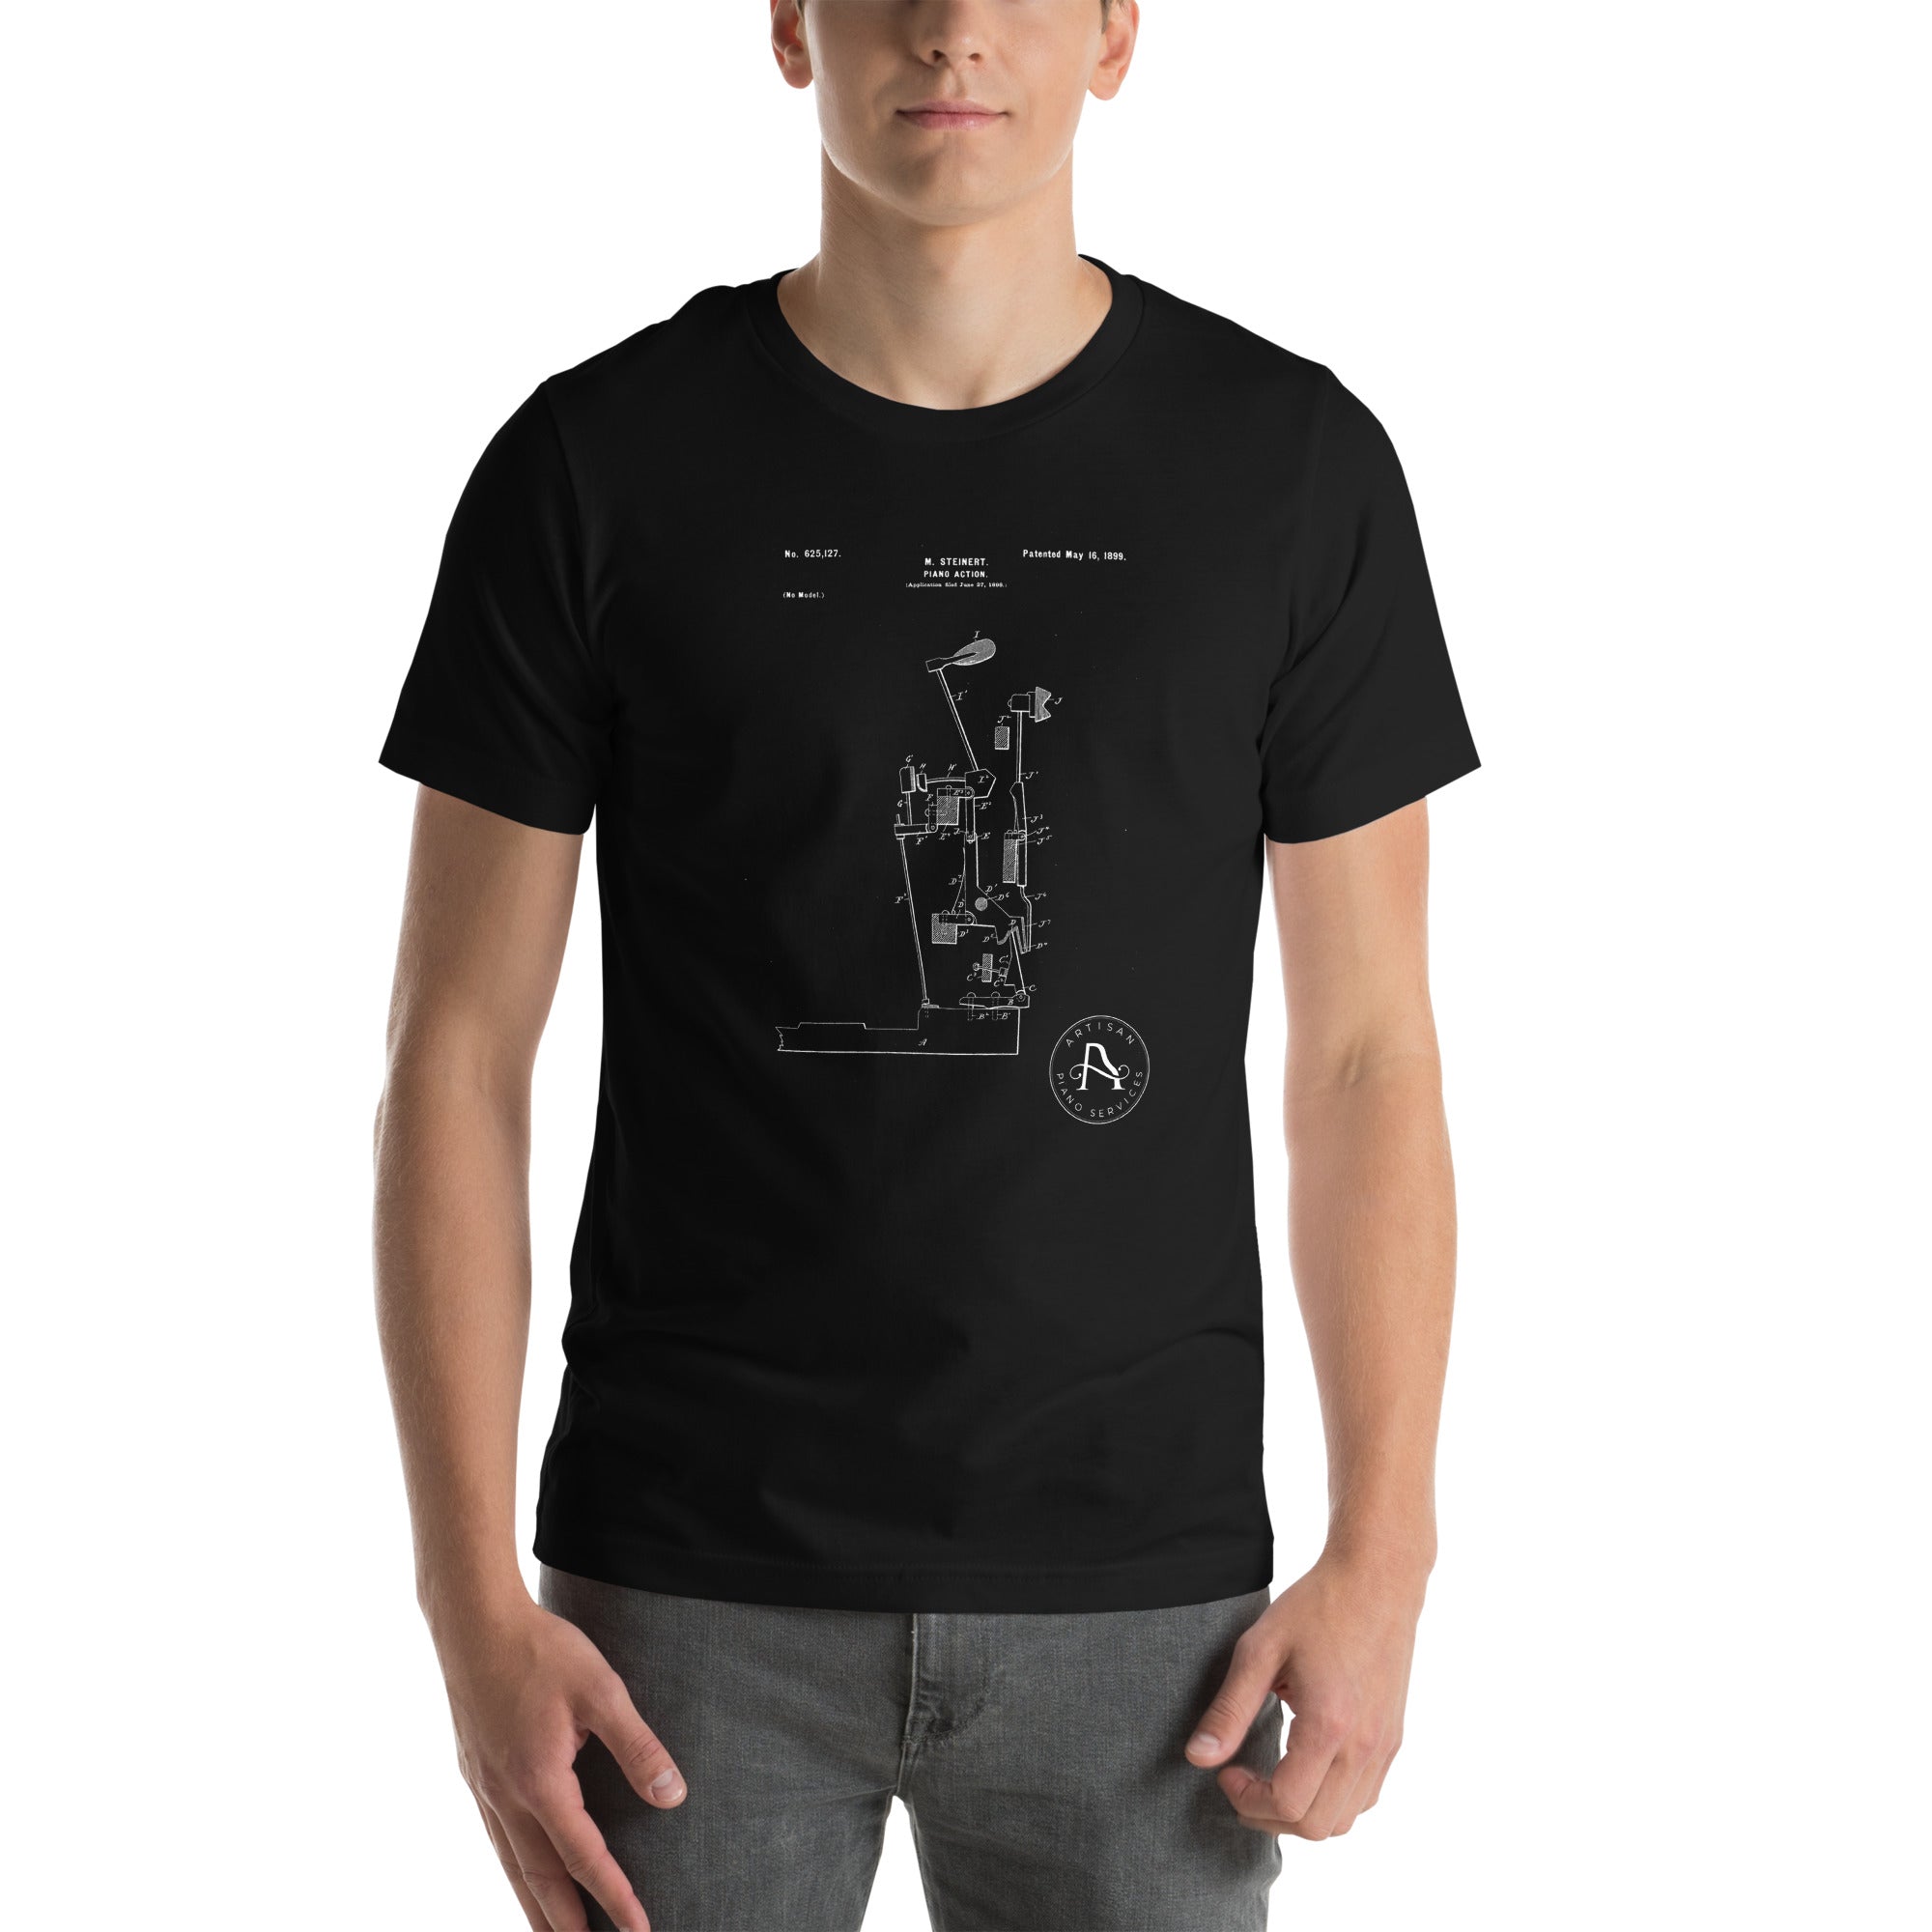 Piano Action Patent T-Shirt - Artisan Piano Services